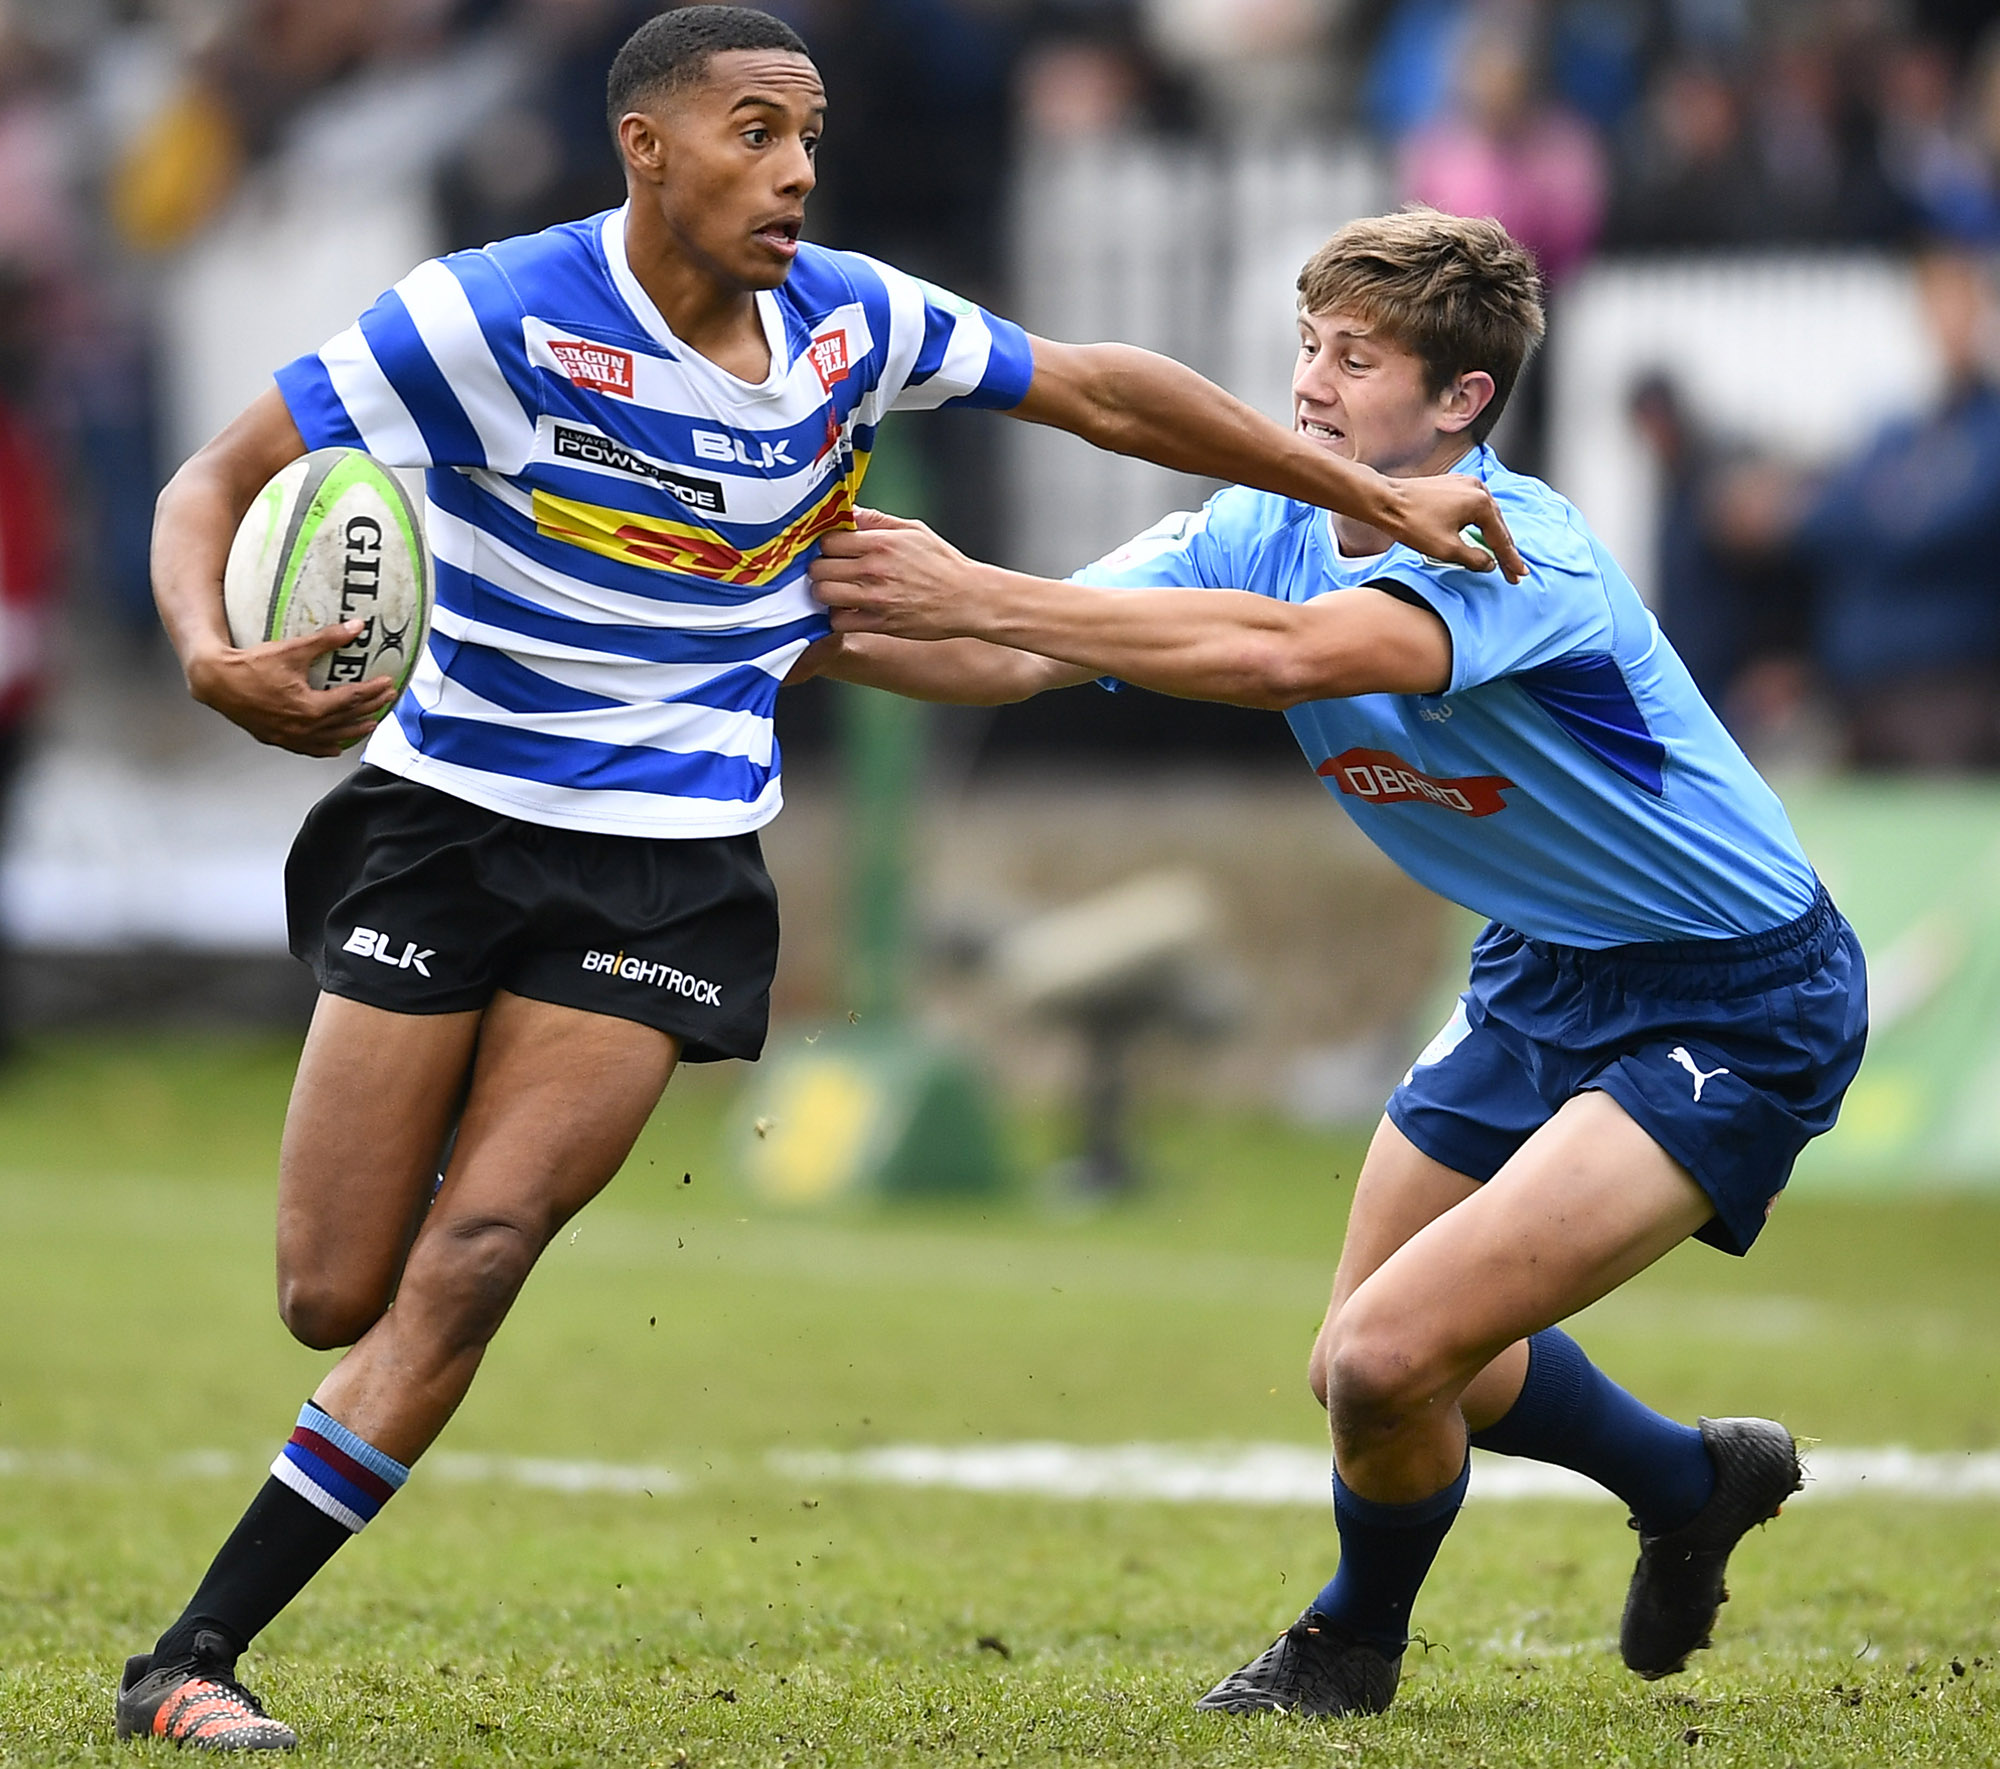 Craven Week draws to a close with victory for Western Province